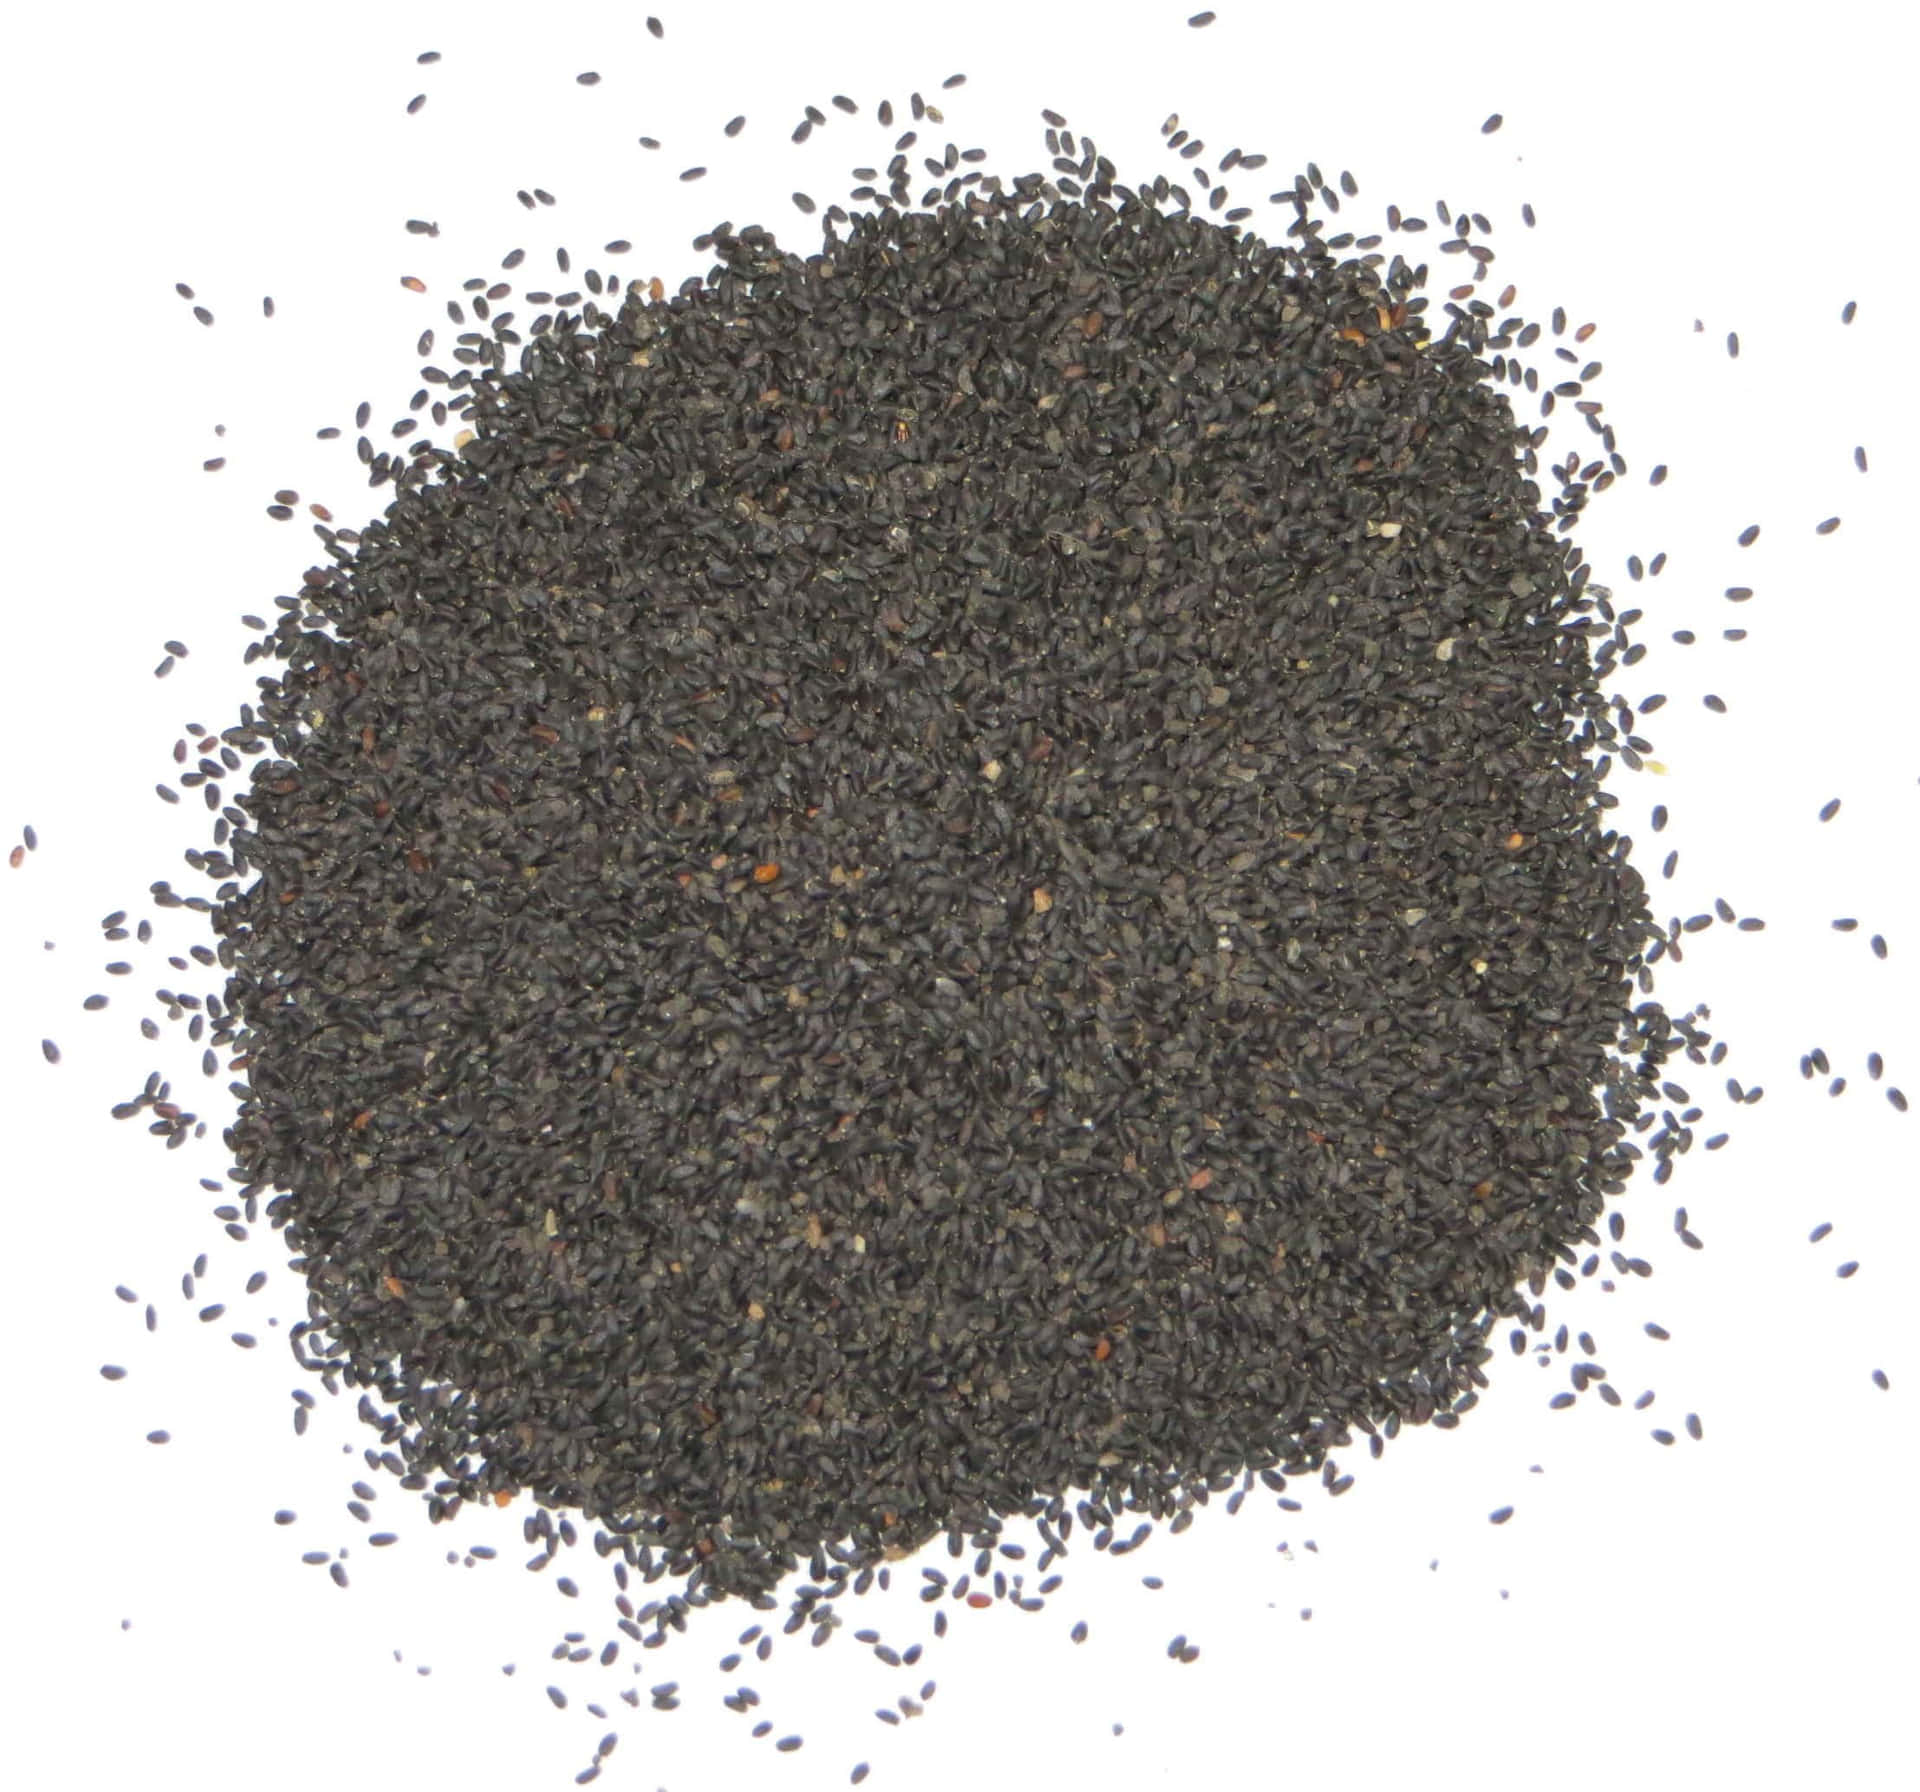 Spicy Whole and Ground Black Cumin Seeds Wallpaper